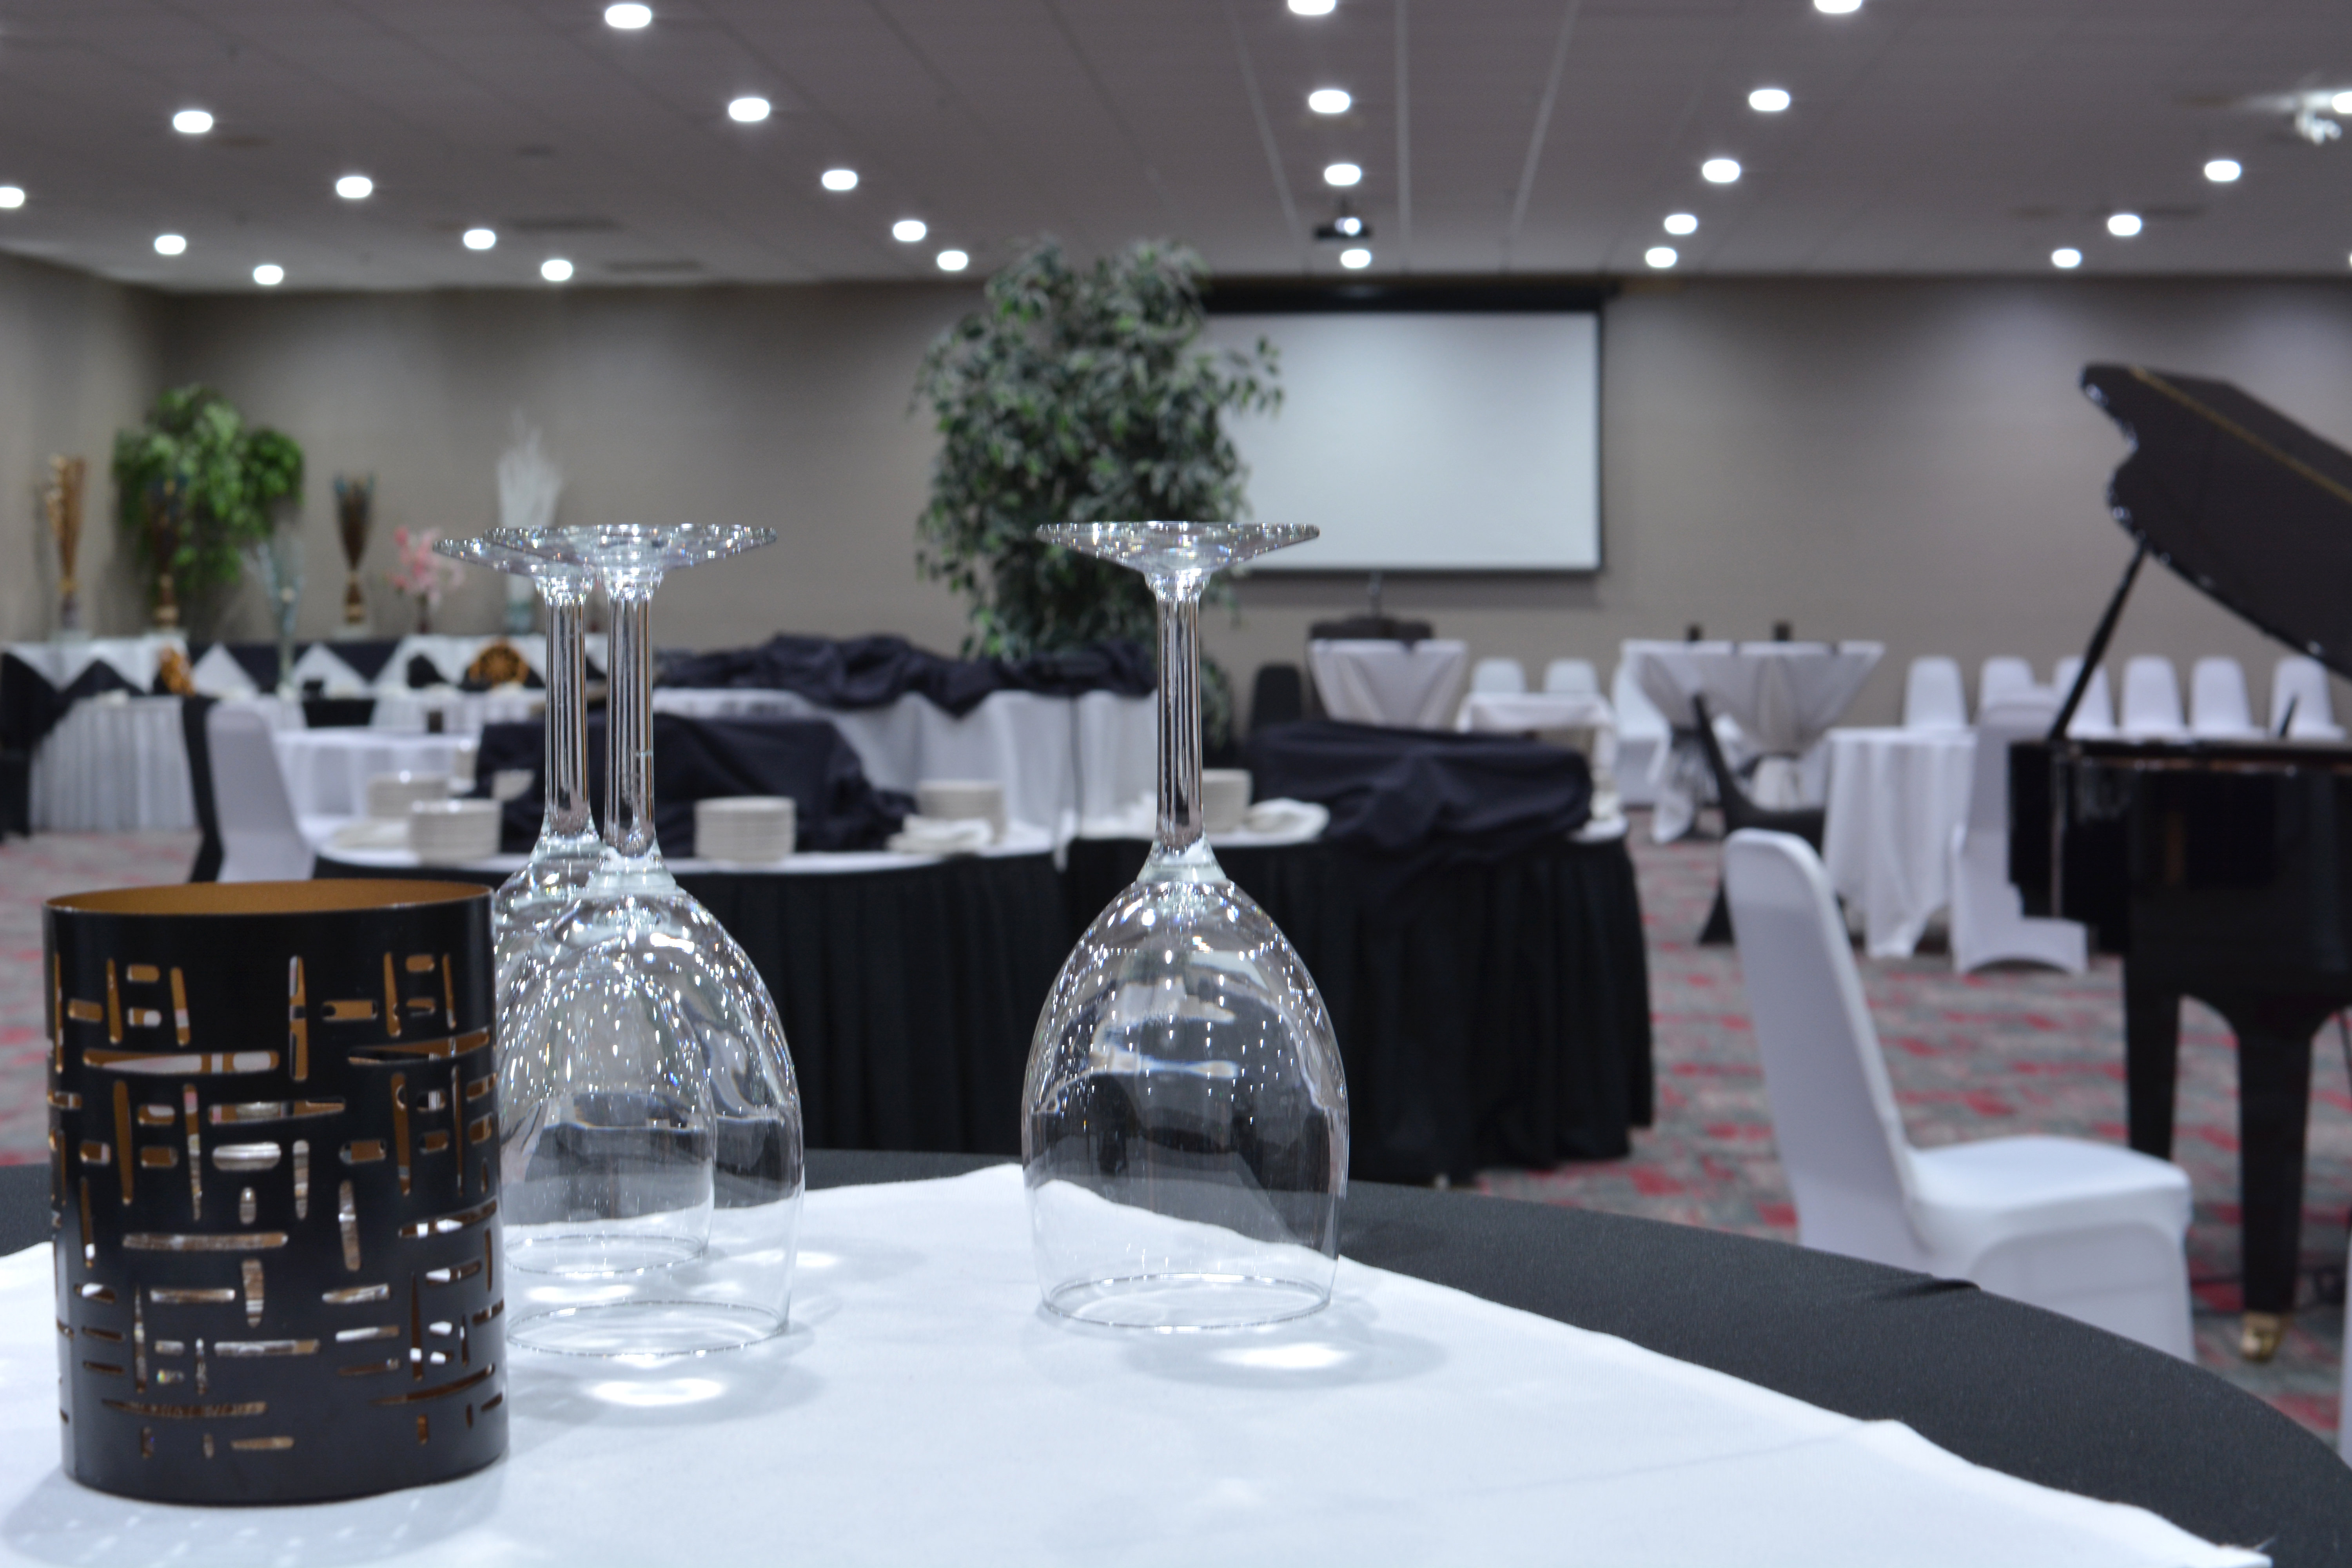 Beautiful conference center ready to cater to any social event.